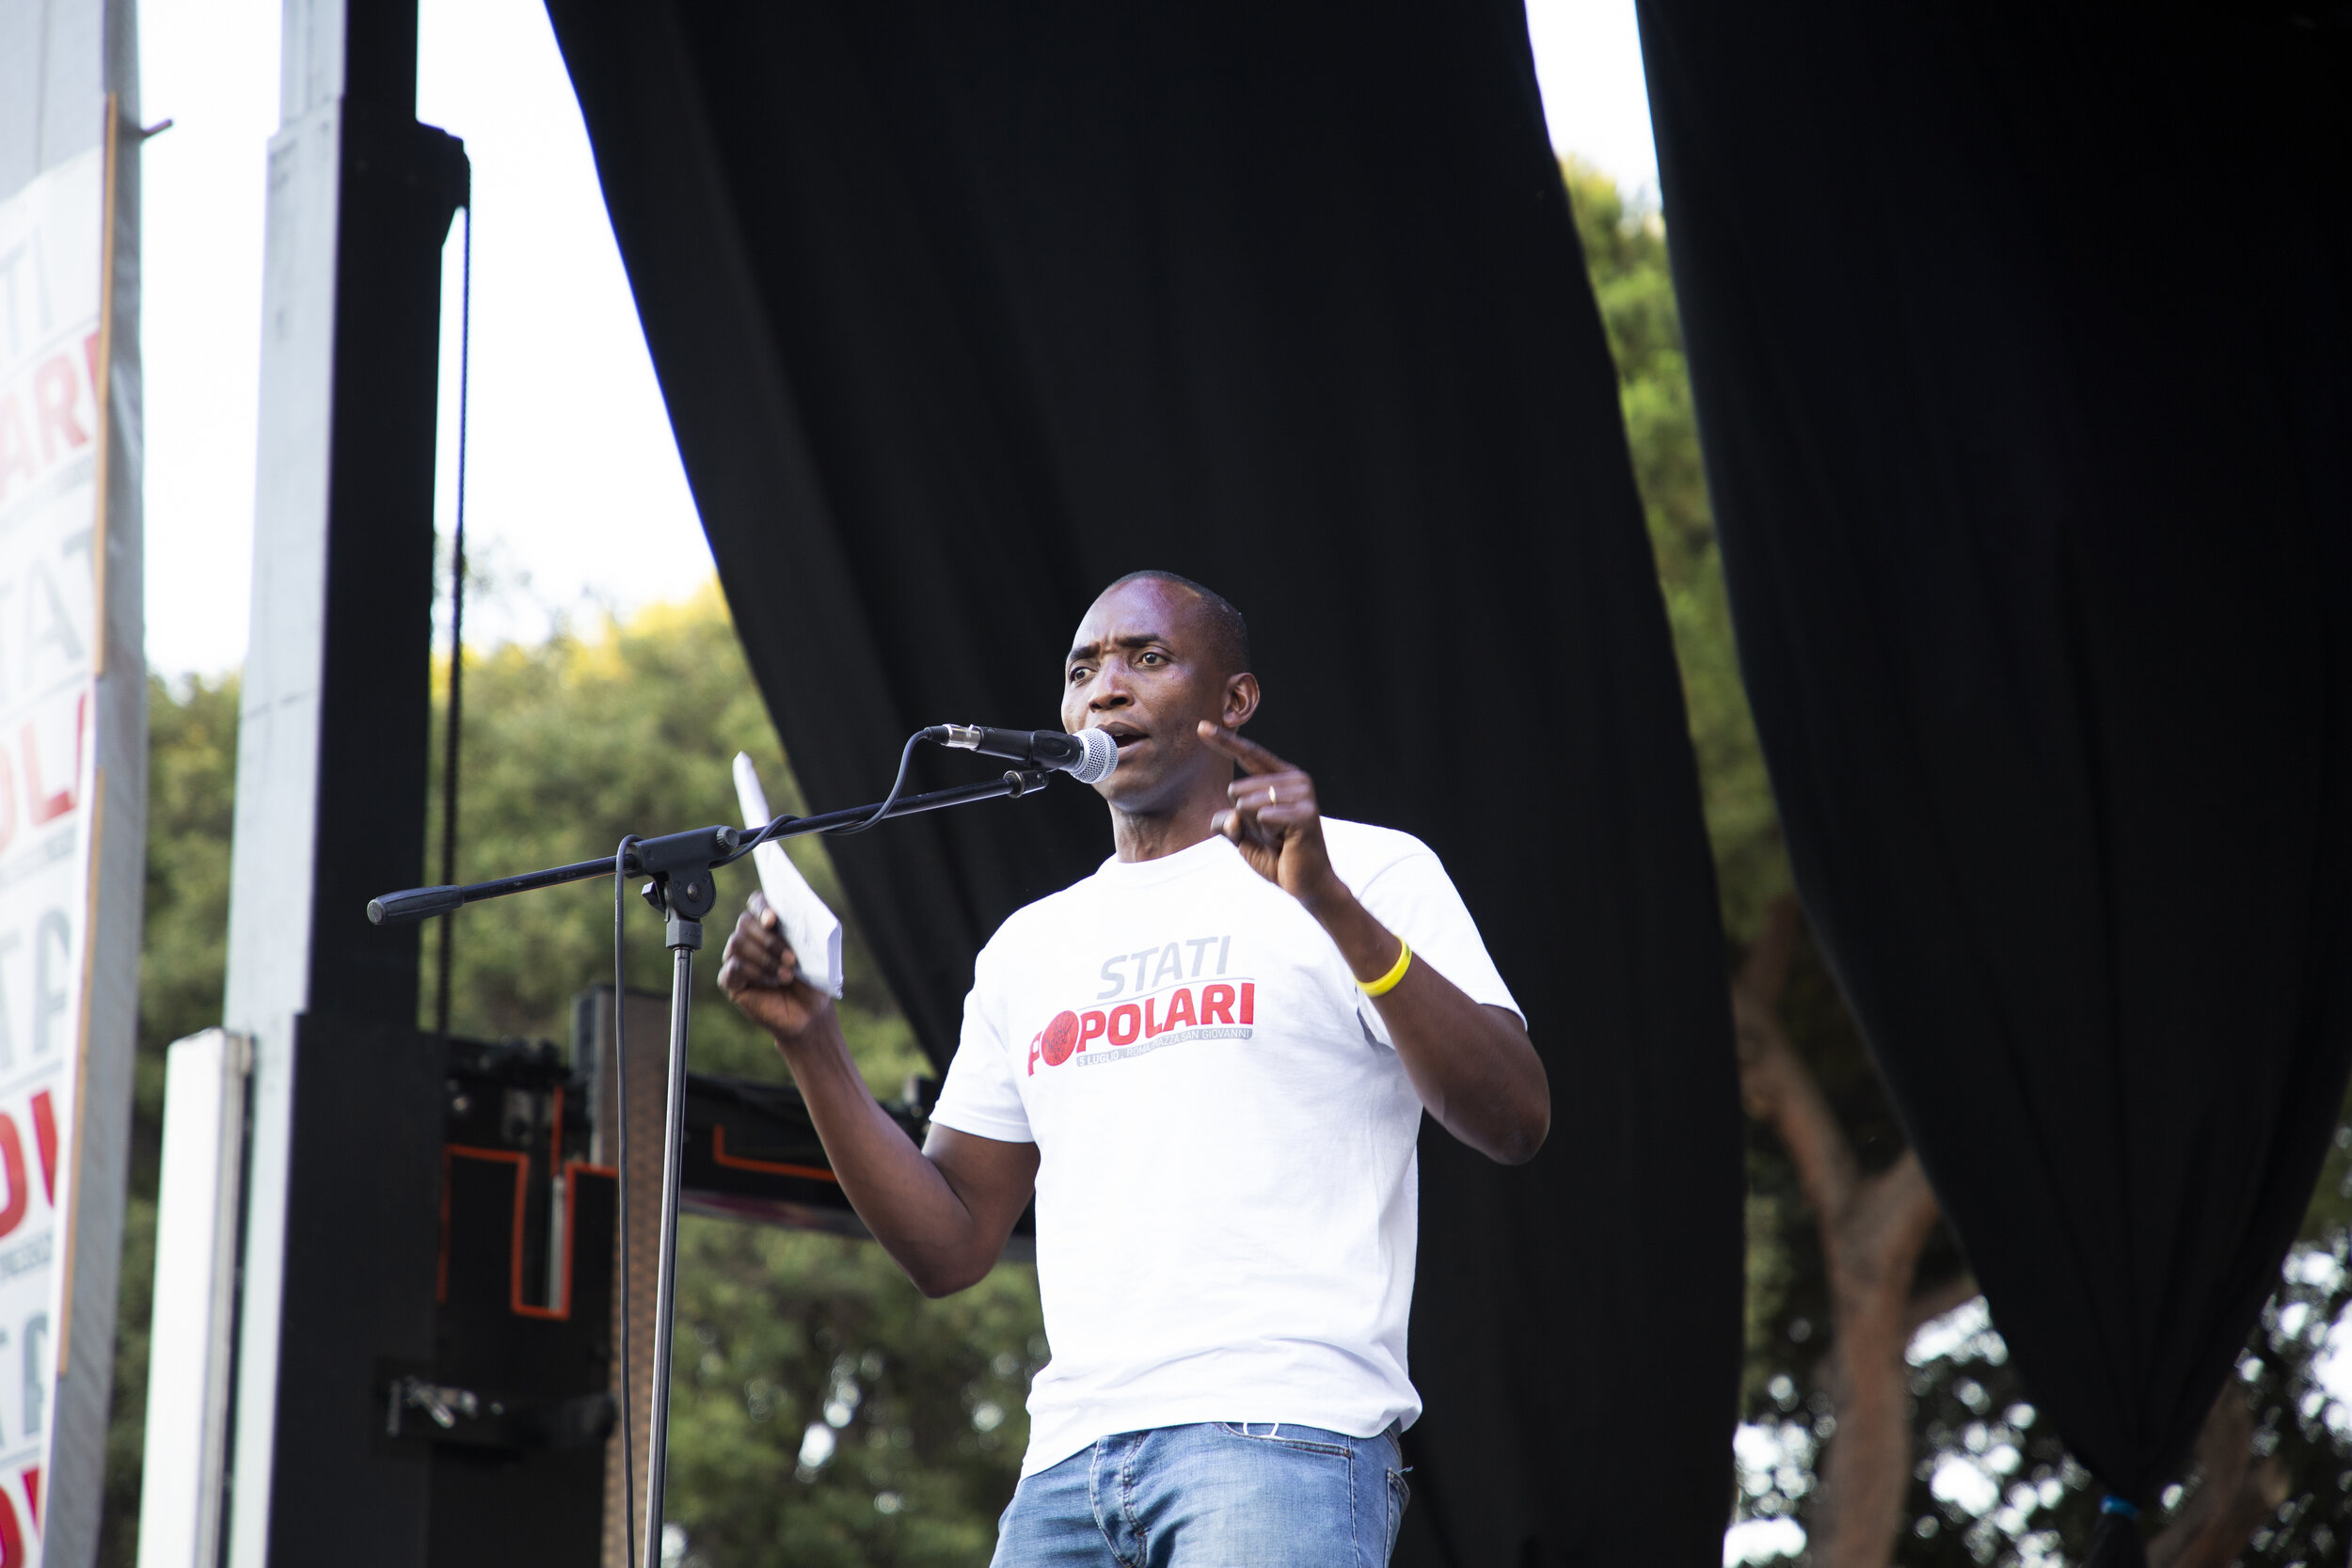  Italian-Ivorian trade-unionist and campaigner Aboubakar Soumahoro is seen addressing an audience in Rome on July 5, 2020. He says the current regularization provision is a failure under any possible aspect.  